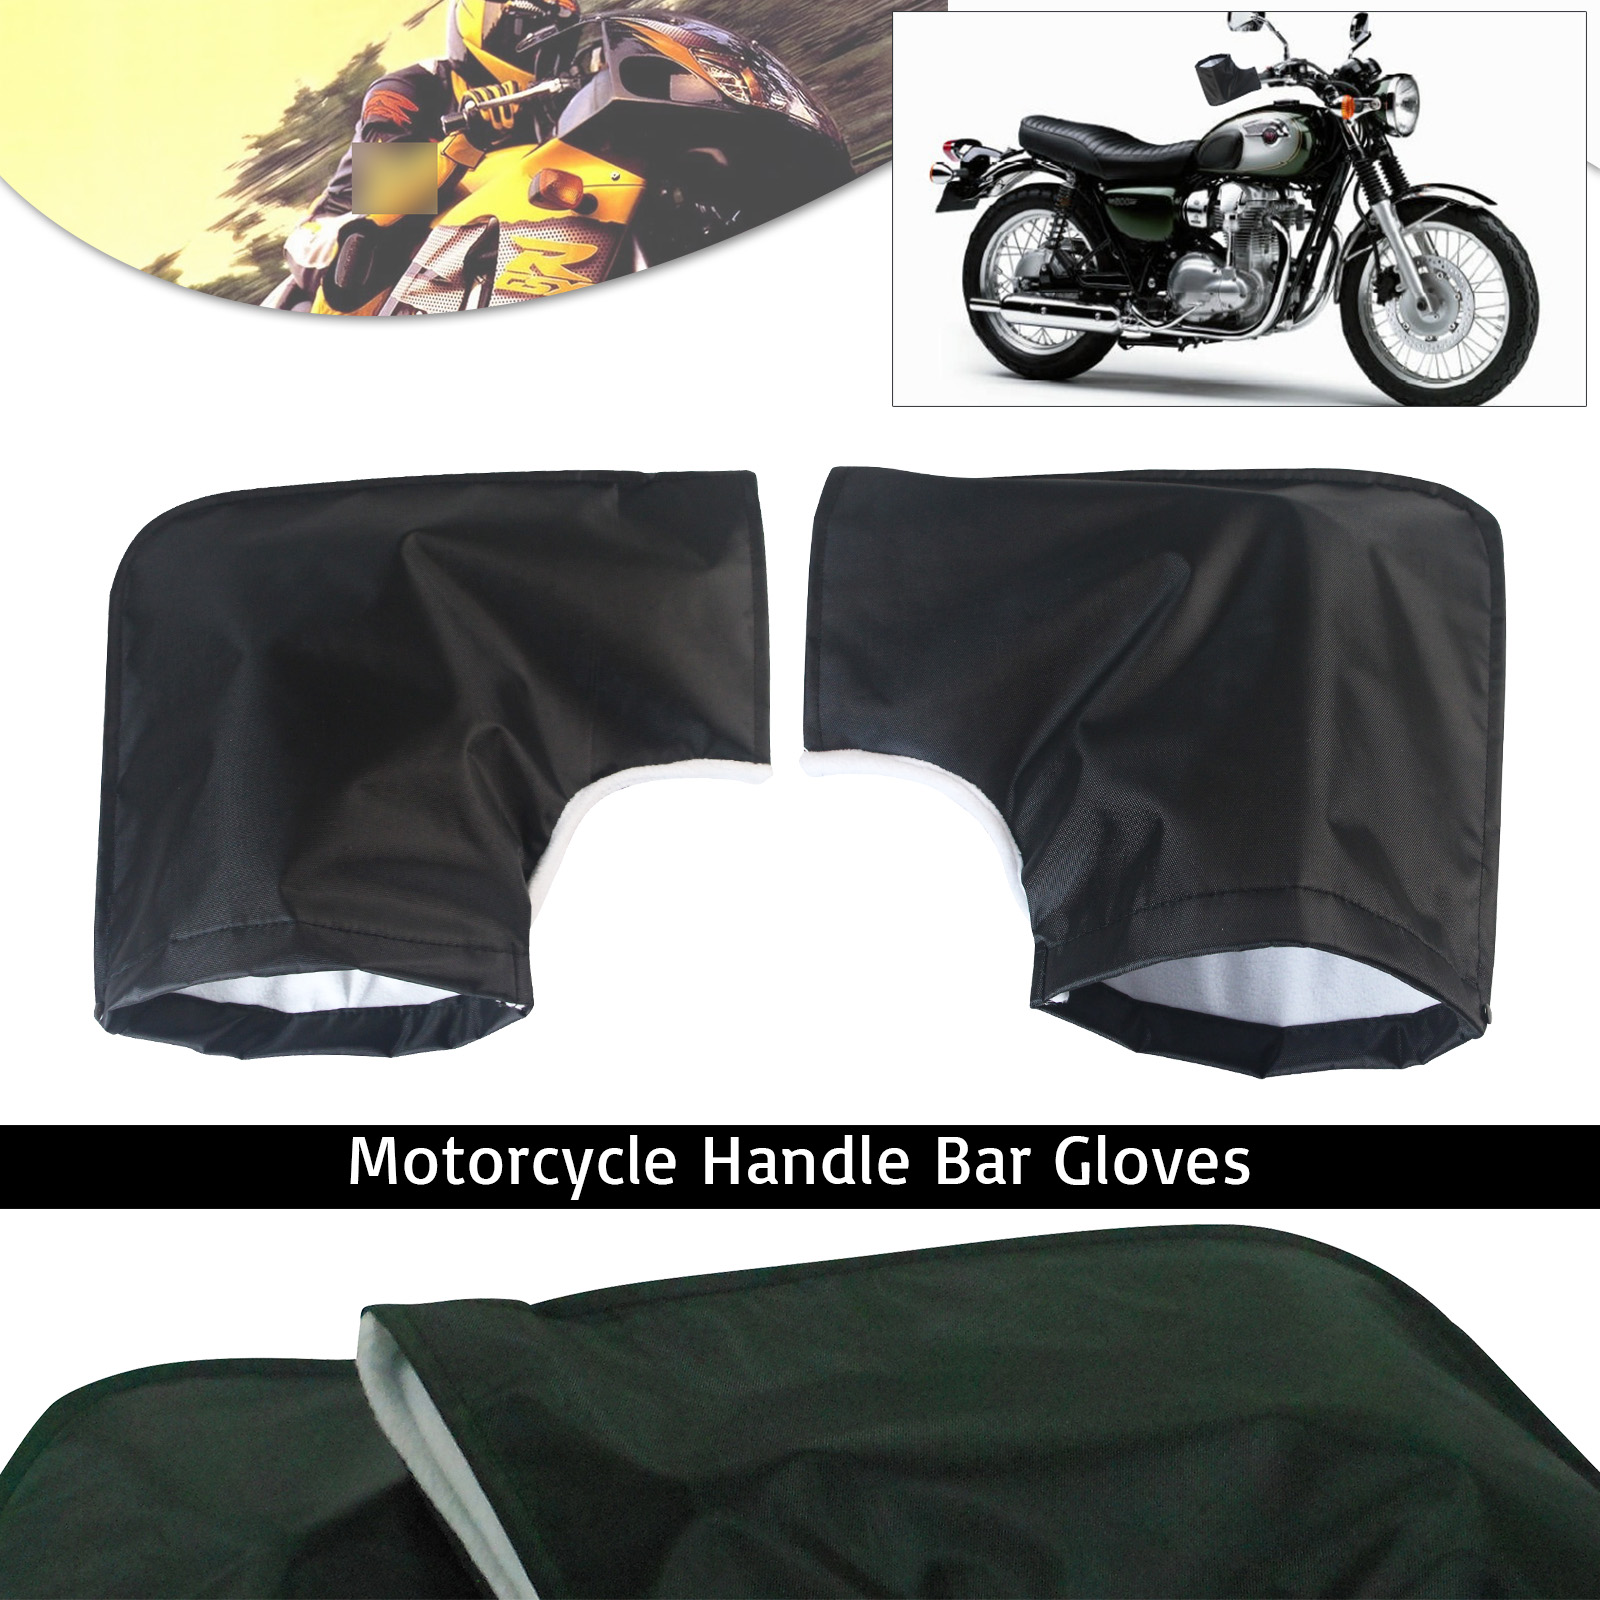 Thermal Motorcycle Handle Bar Muffs Motorbike Hand Protection Mitts/Gloves Bike